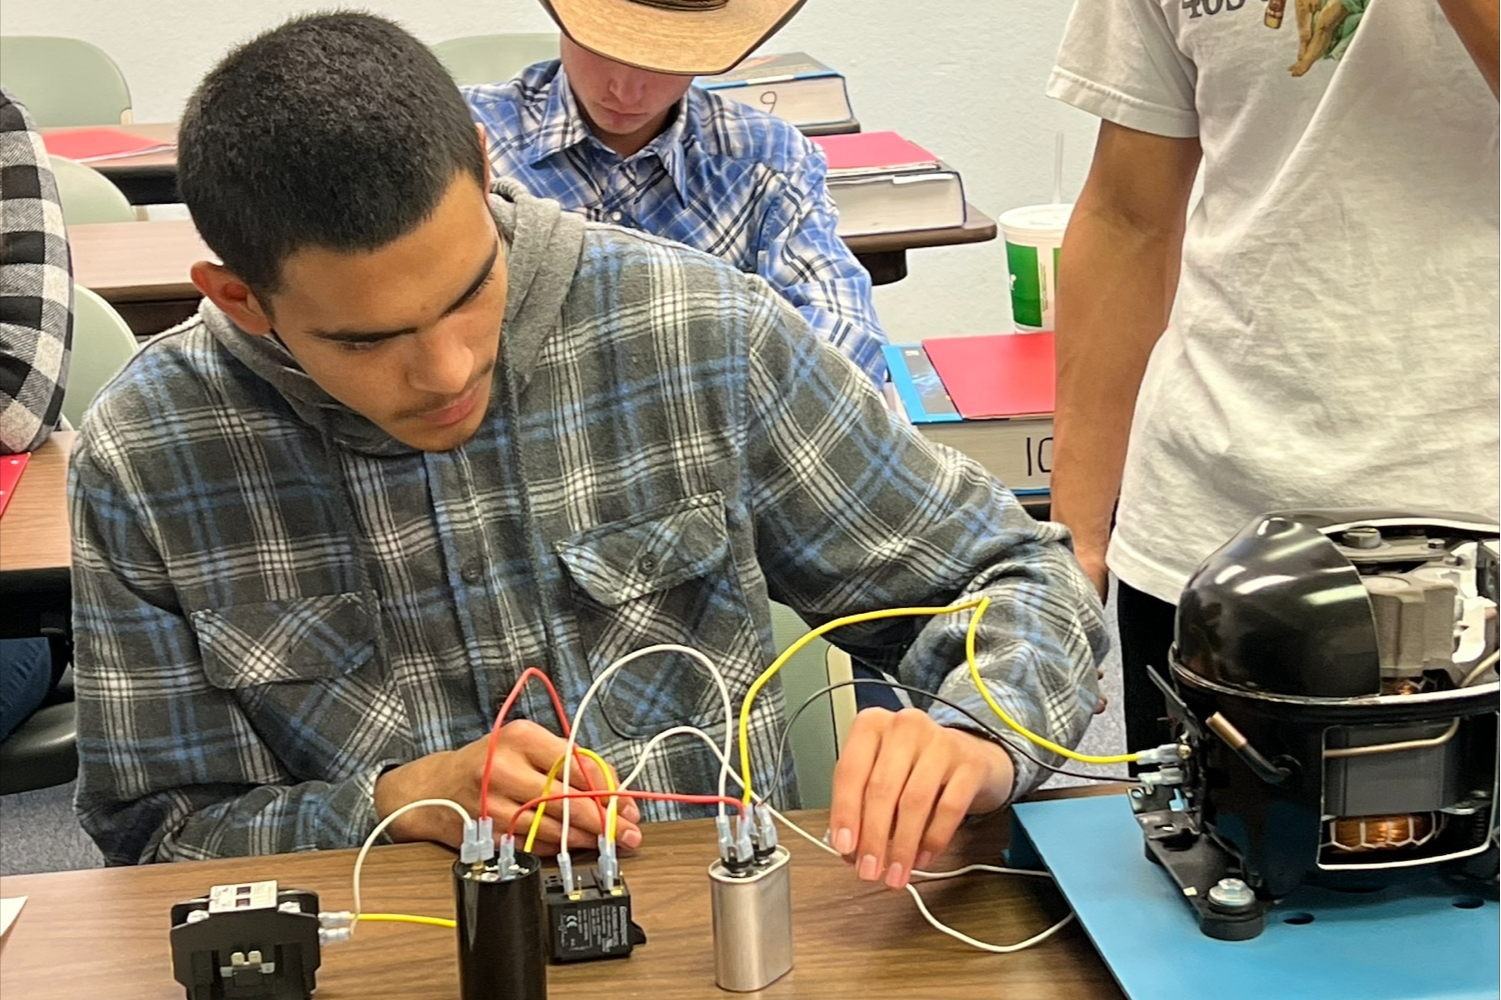 Student practicing wiring on HVAC-R model